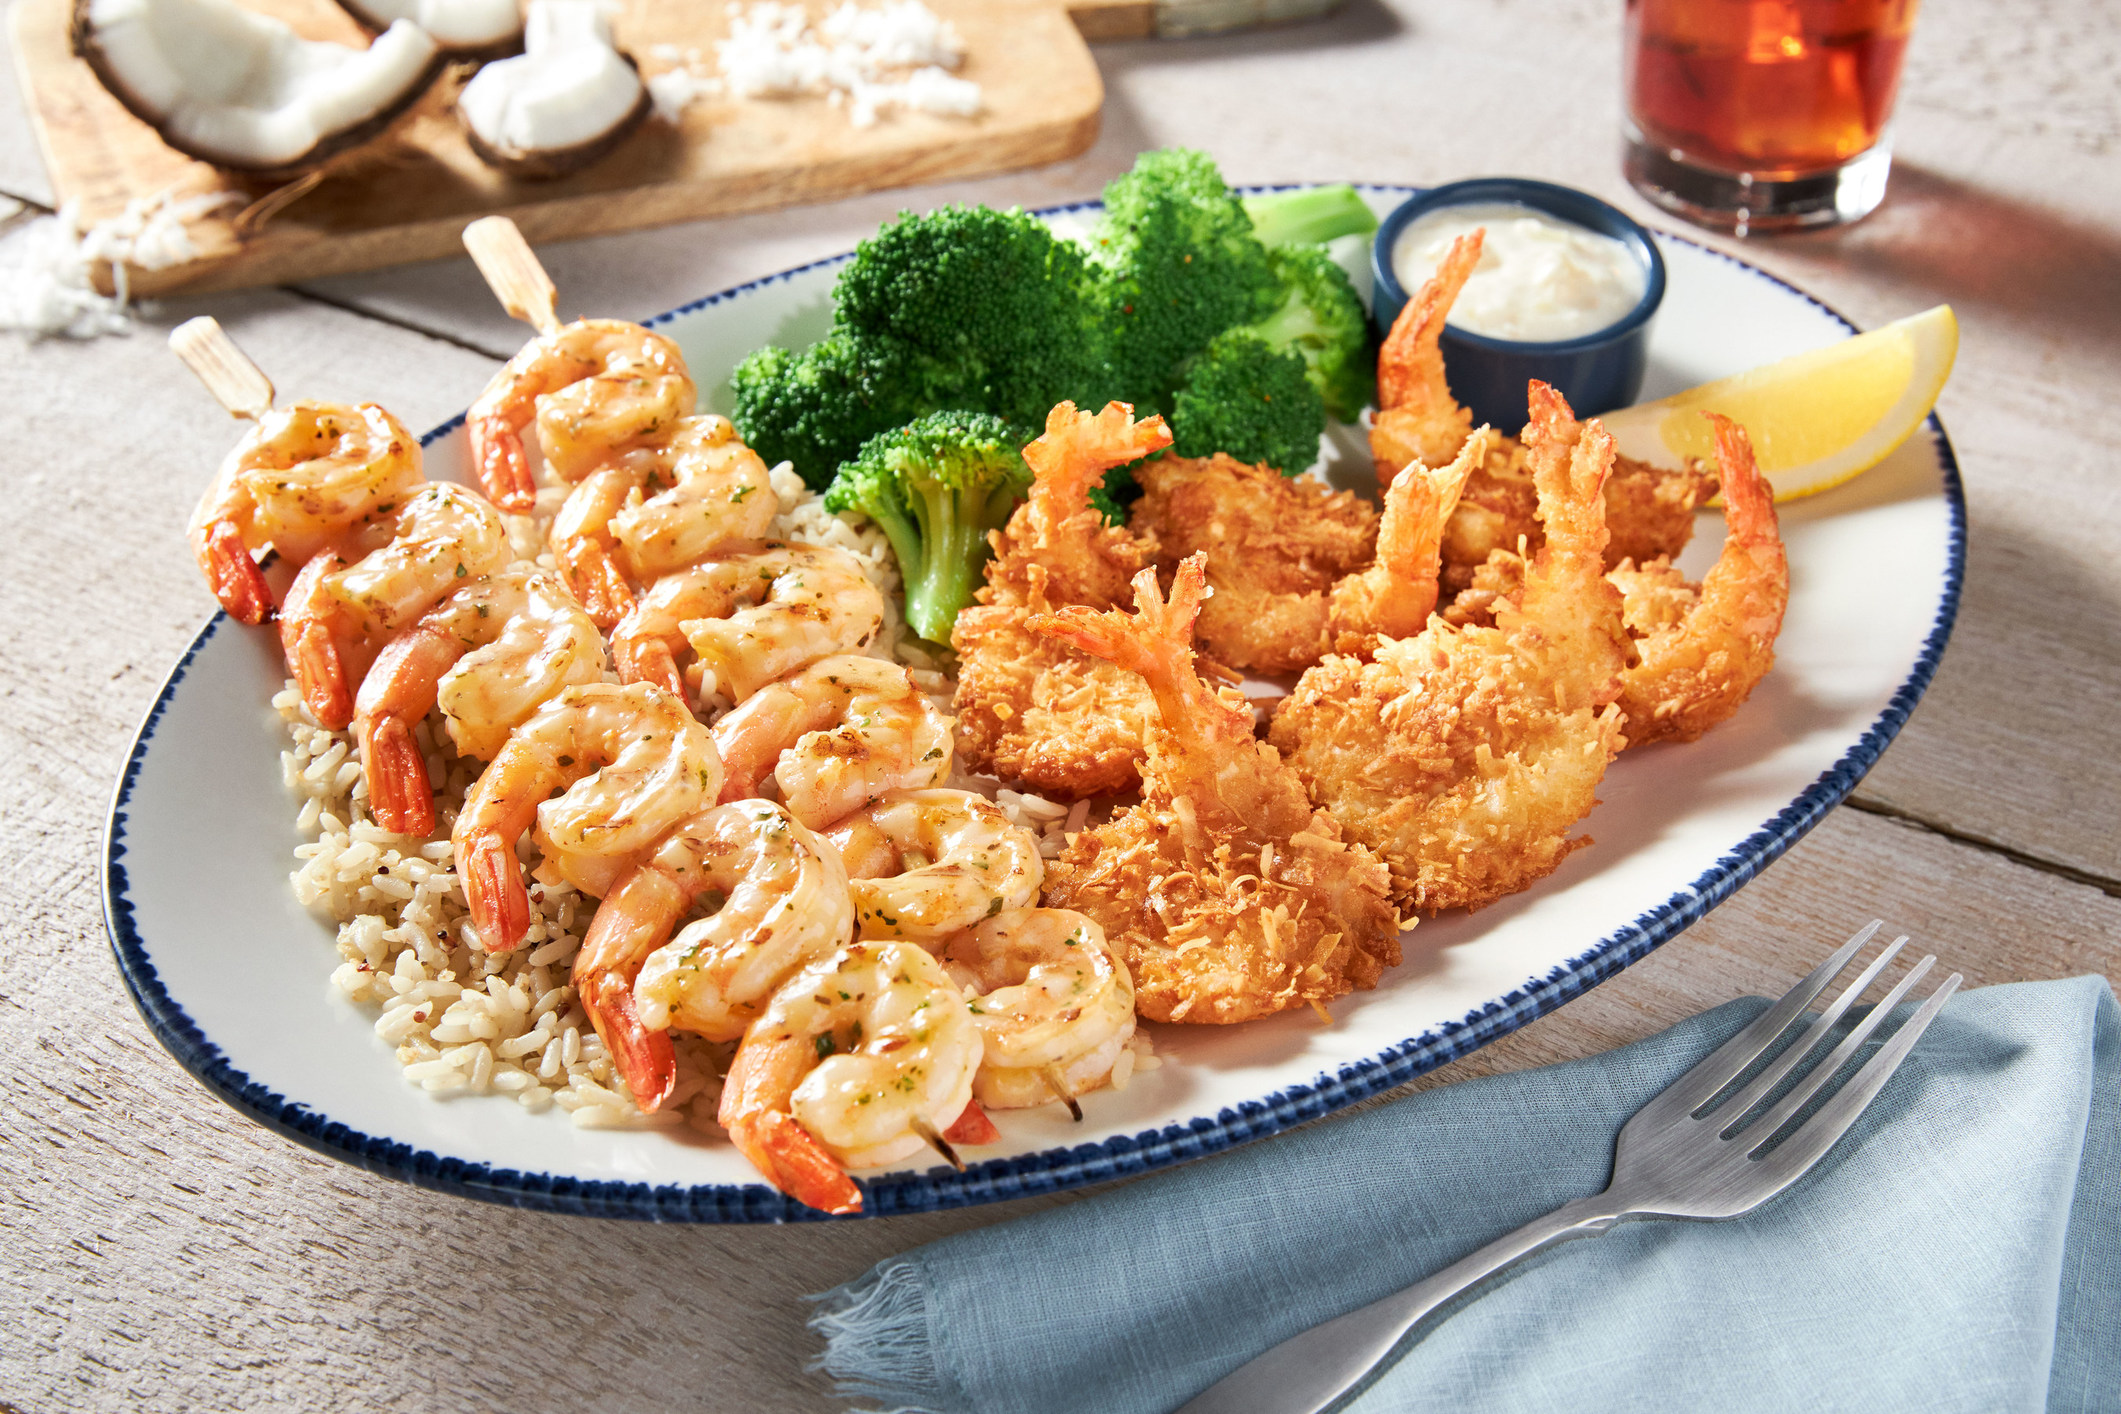 Red Lobster® Announces Ultimate Endless Shrimp Now Available All Day